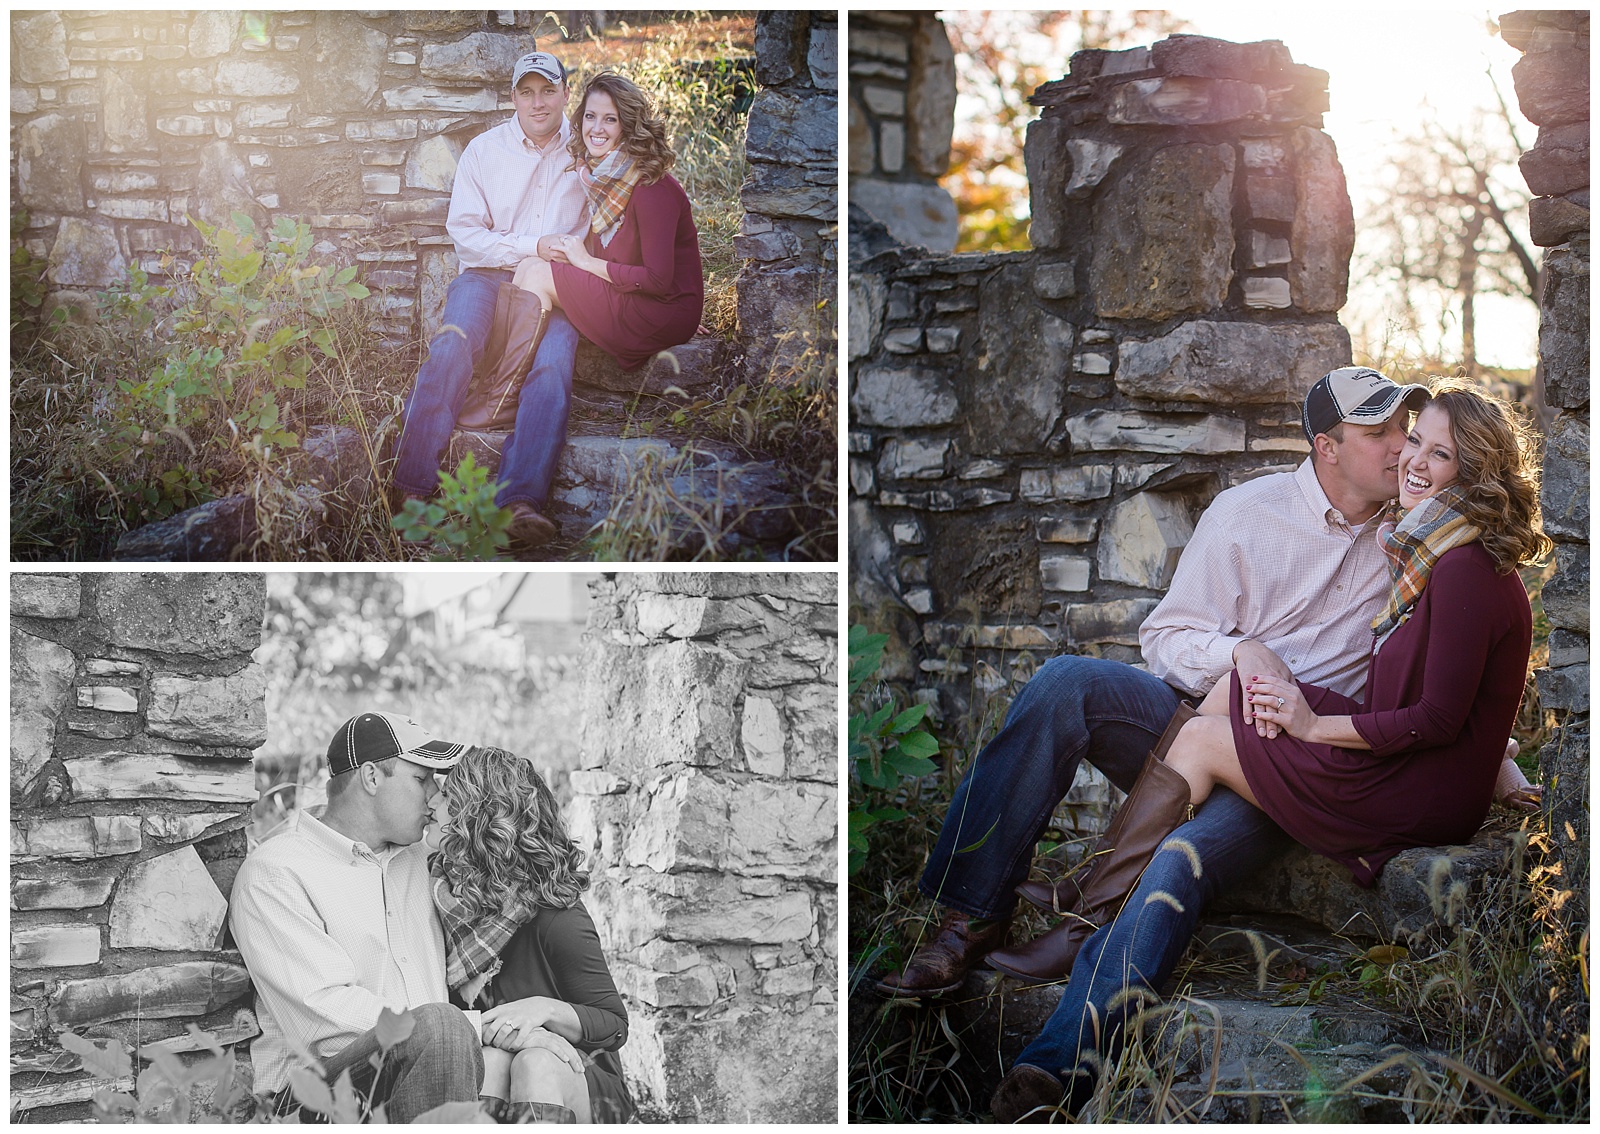 A Unity Village engagement session in Lee's Summit, Missouri.